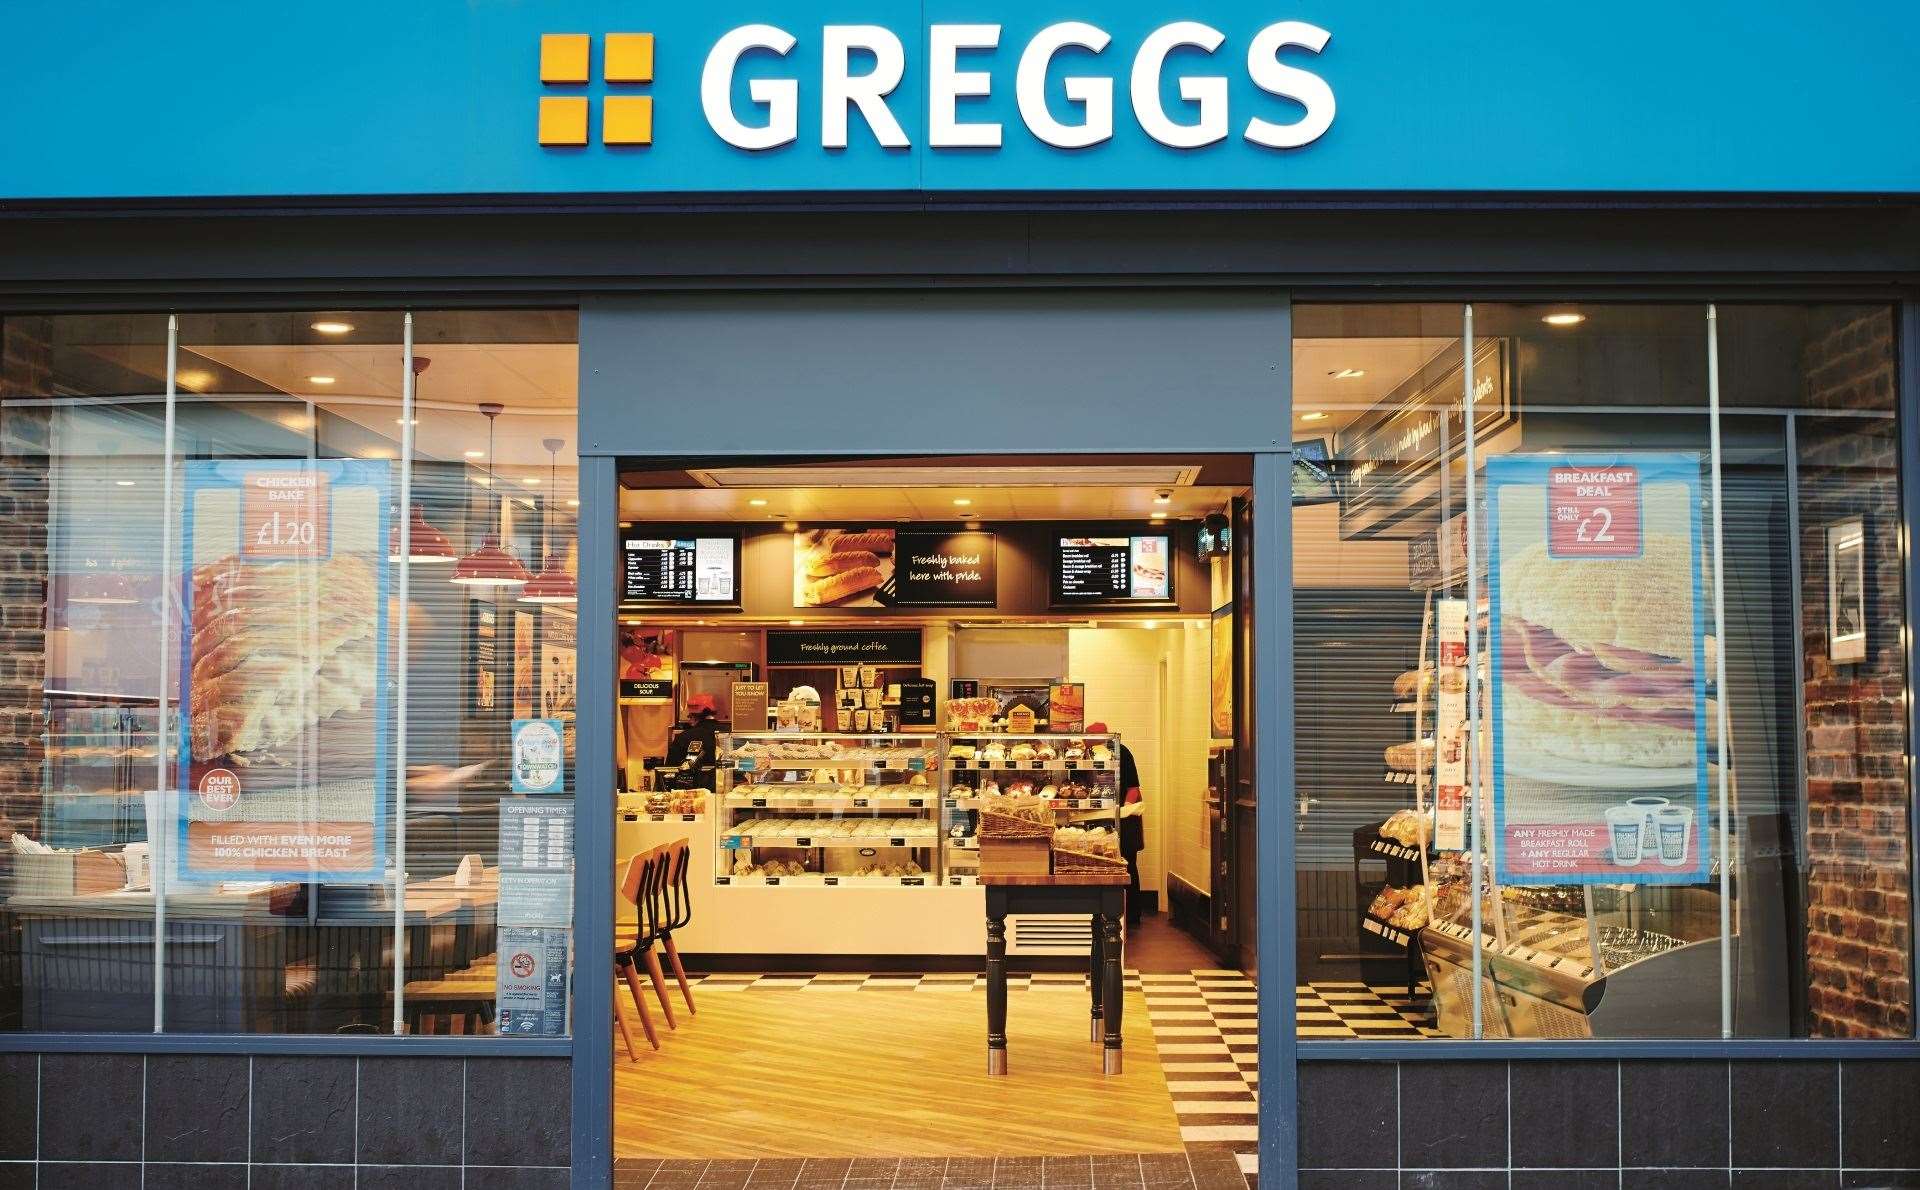 Customers will soon be able to get takeaways from Greggs